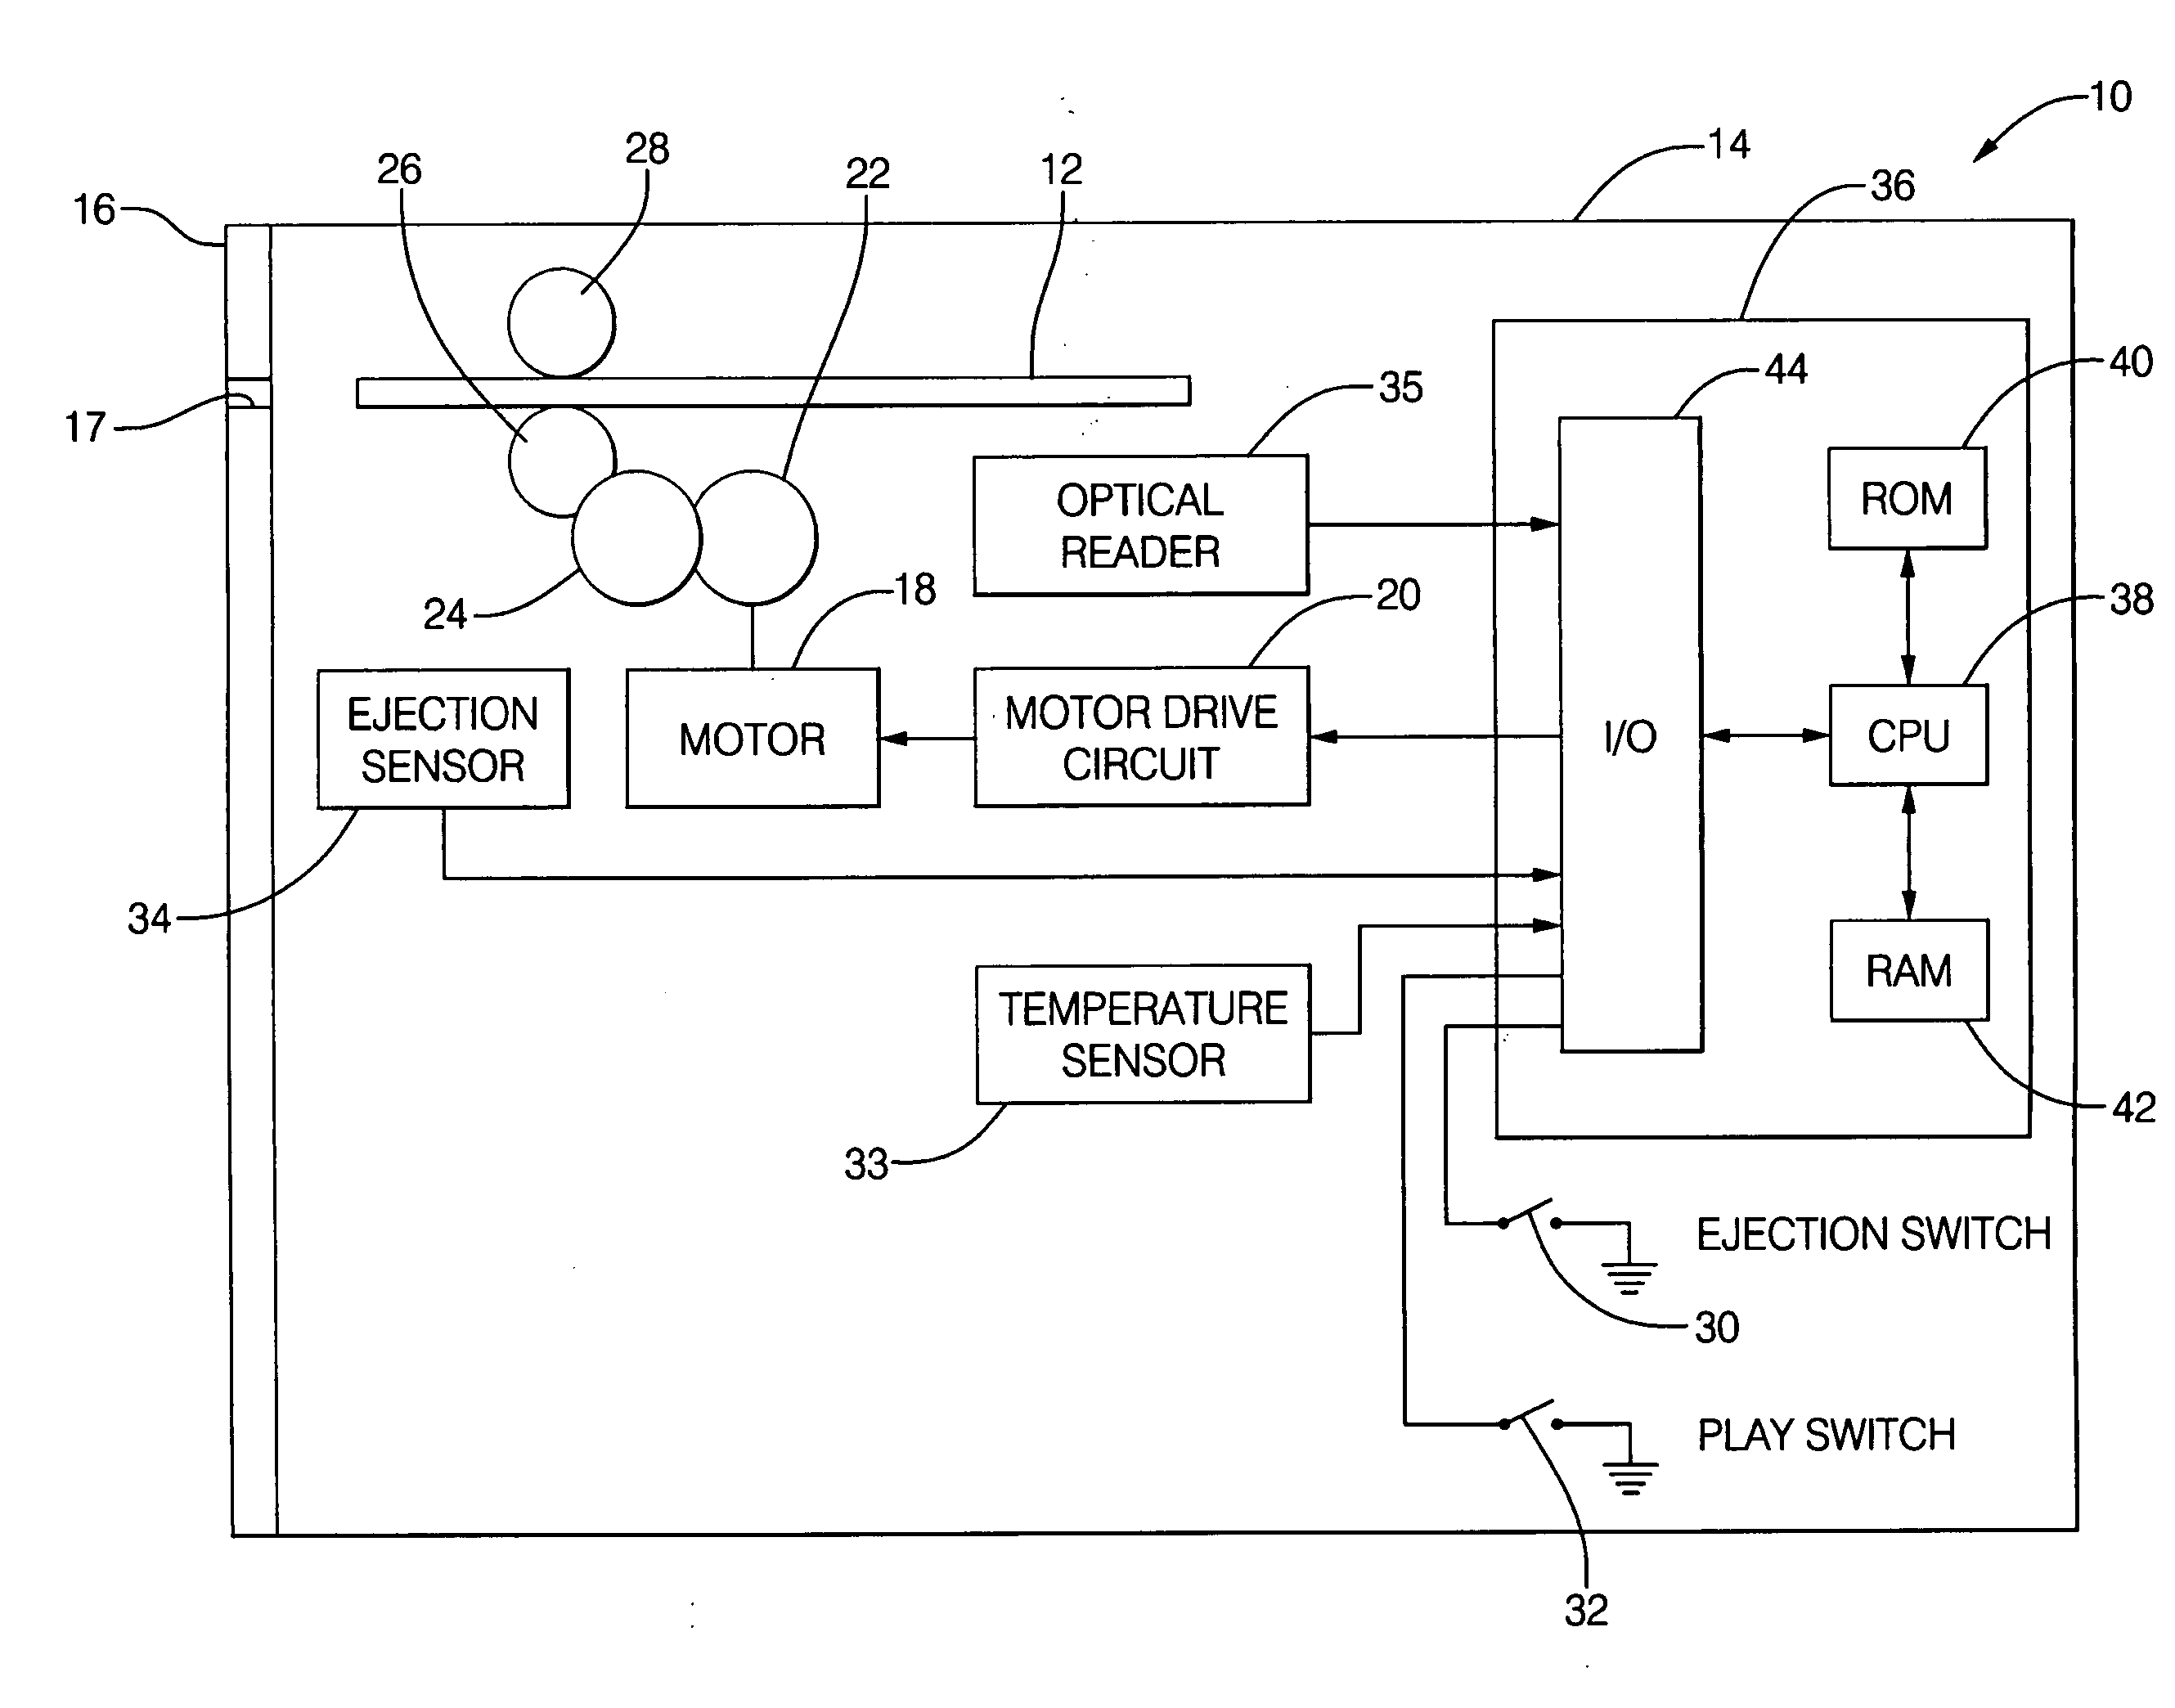 Compact disc player and method for controlling ejection of a compact disc from the compact disc player